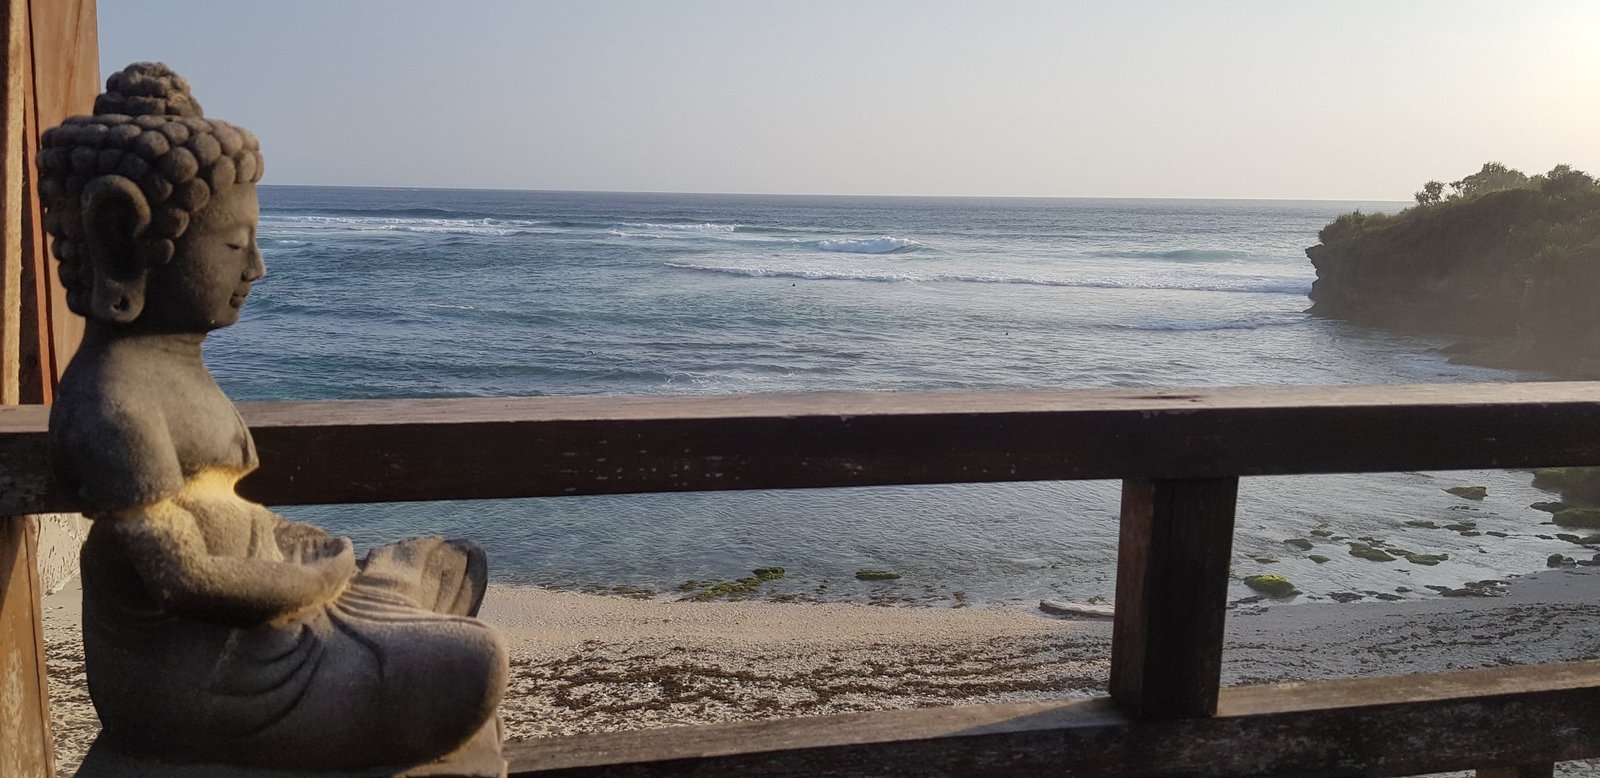 What to Do in Bali & Lembongan – Top 10 Attractions